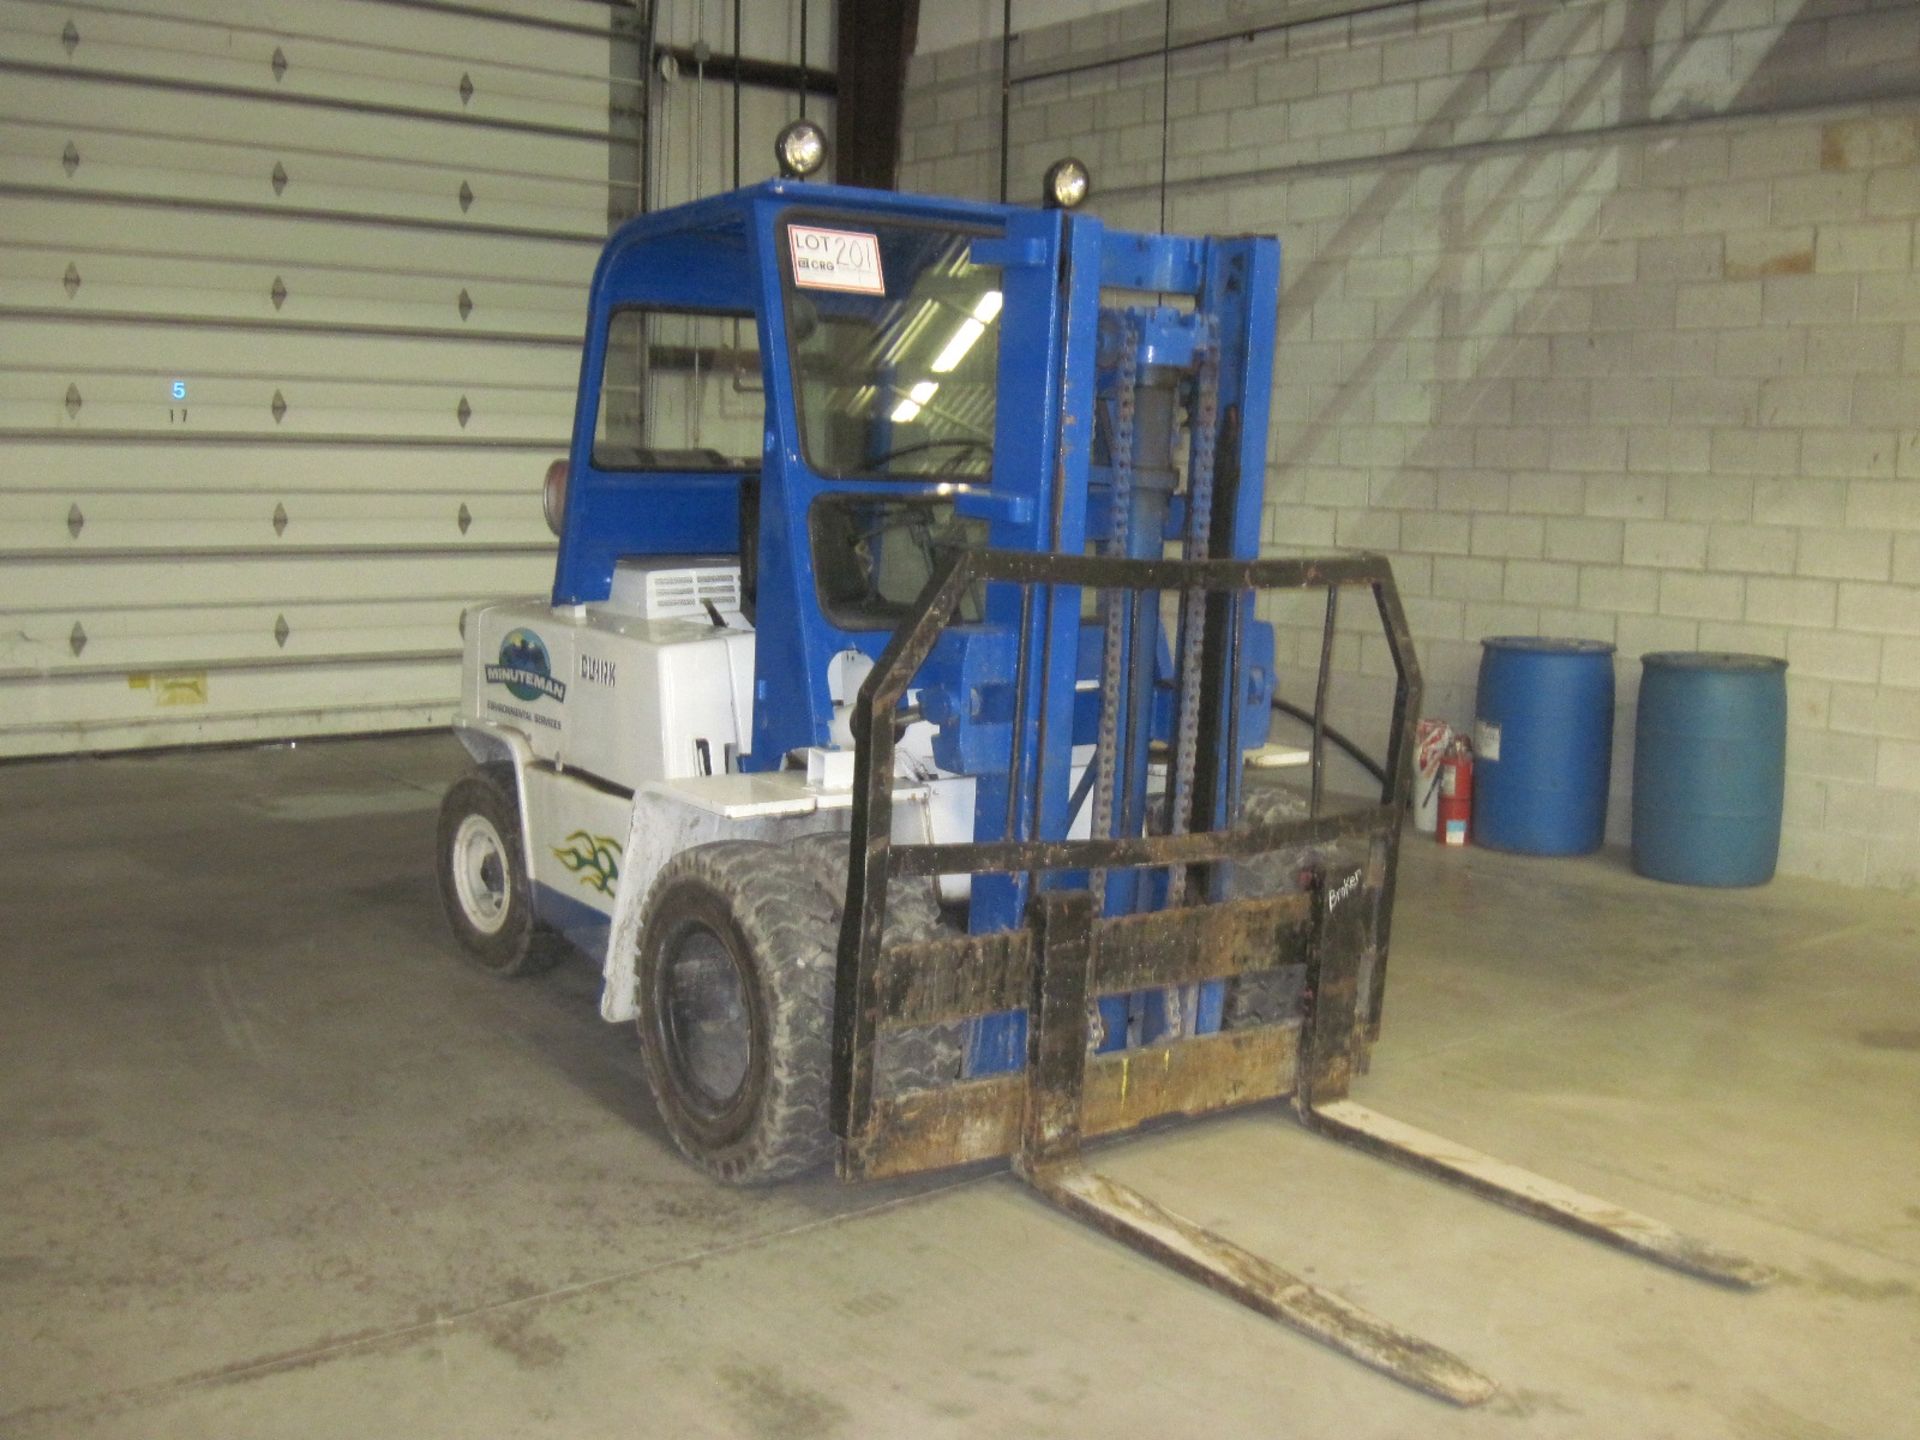 Clark propane powered forklift, M/N C500Y80, 8,000 lb cap, pneumatic tires, 2-stage mast, 123"